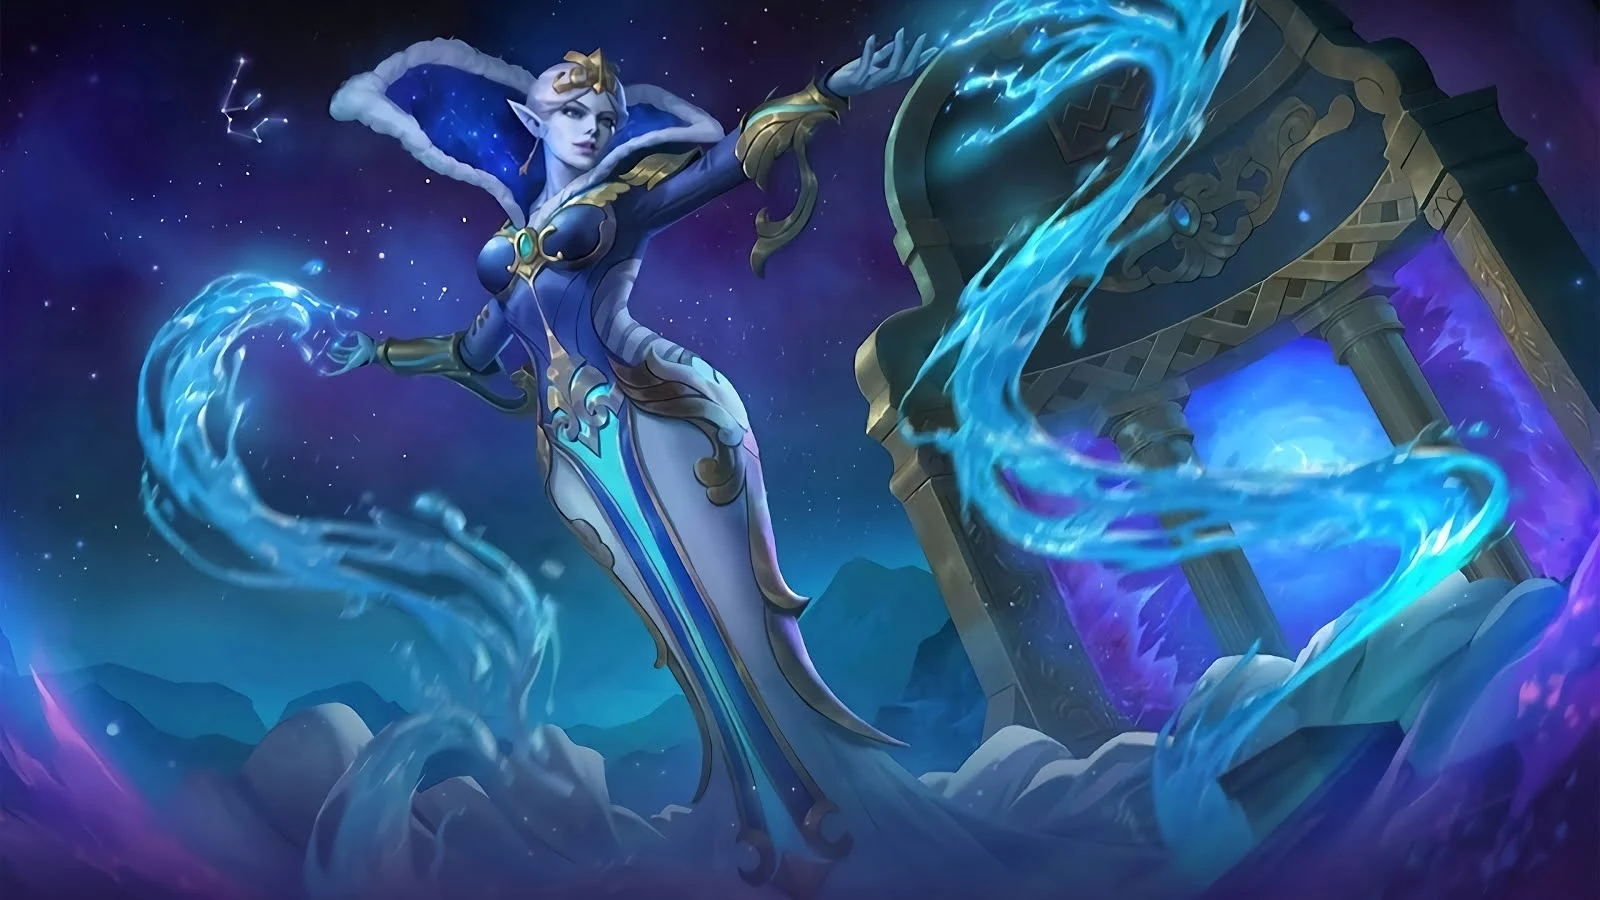 Picture#29 Mobile Legends Wallpapers HD: ALL ZODIAC SKINS WALLPAPERS HD